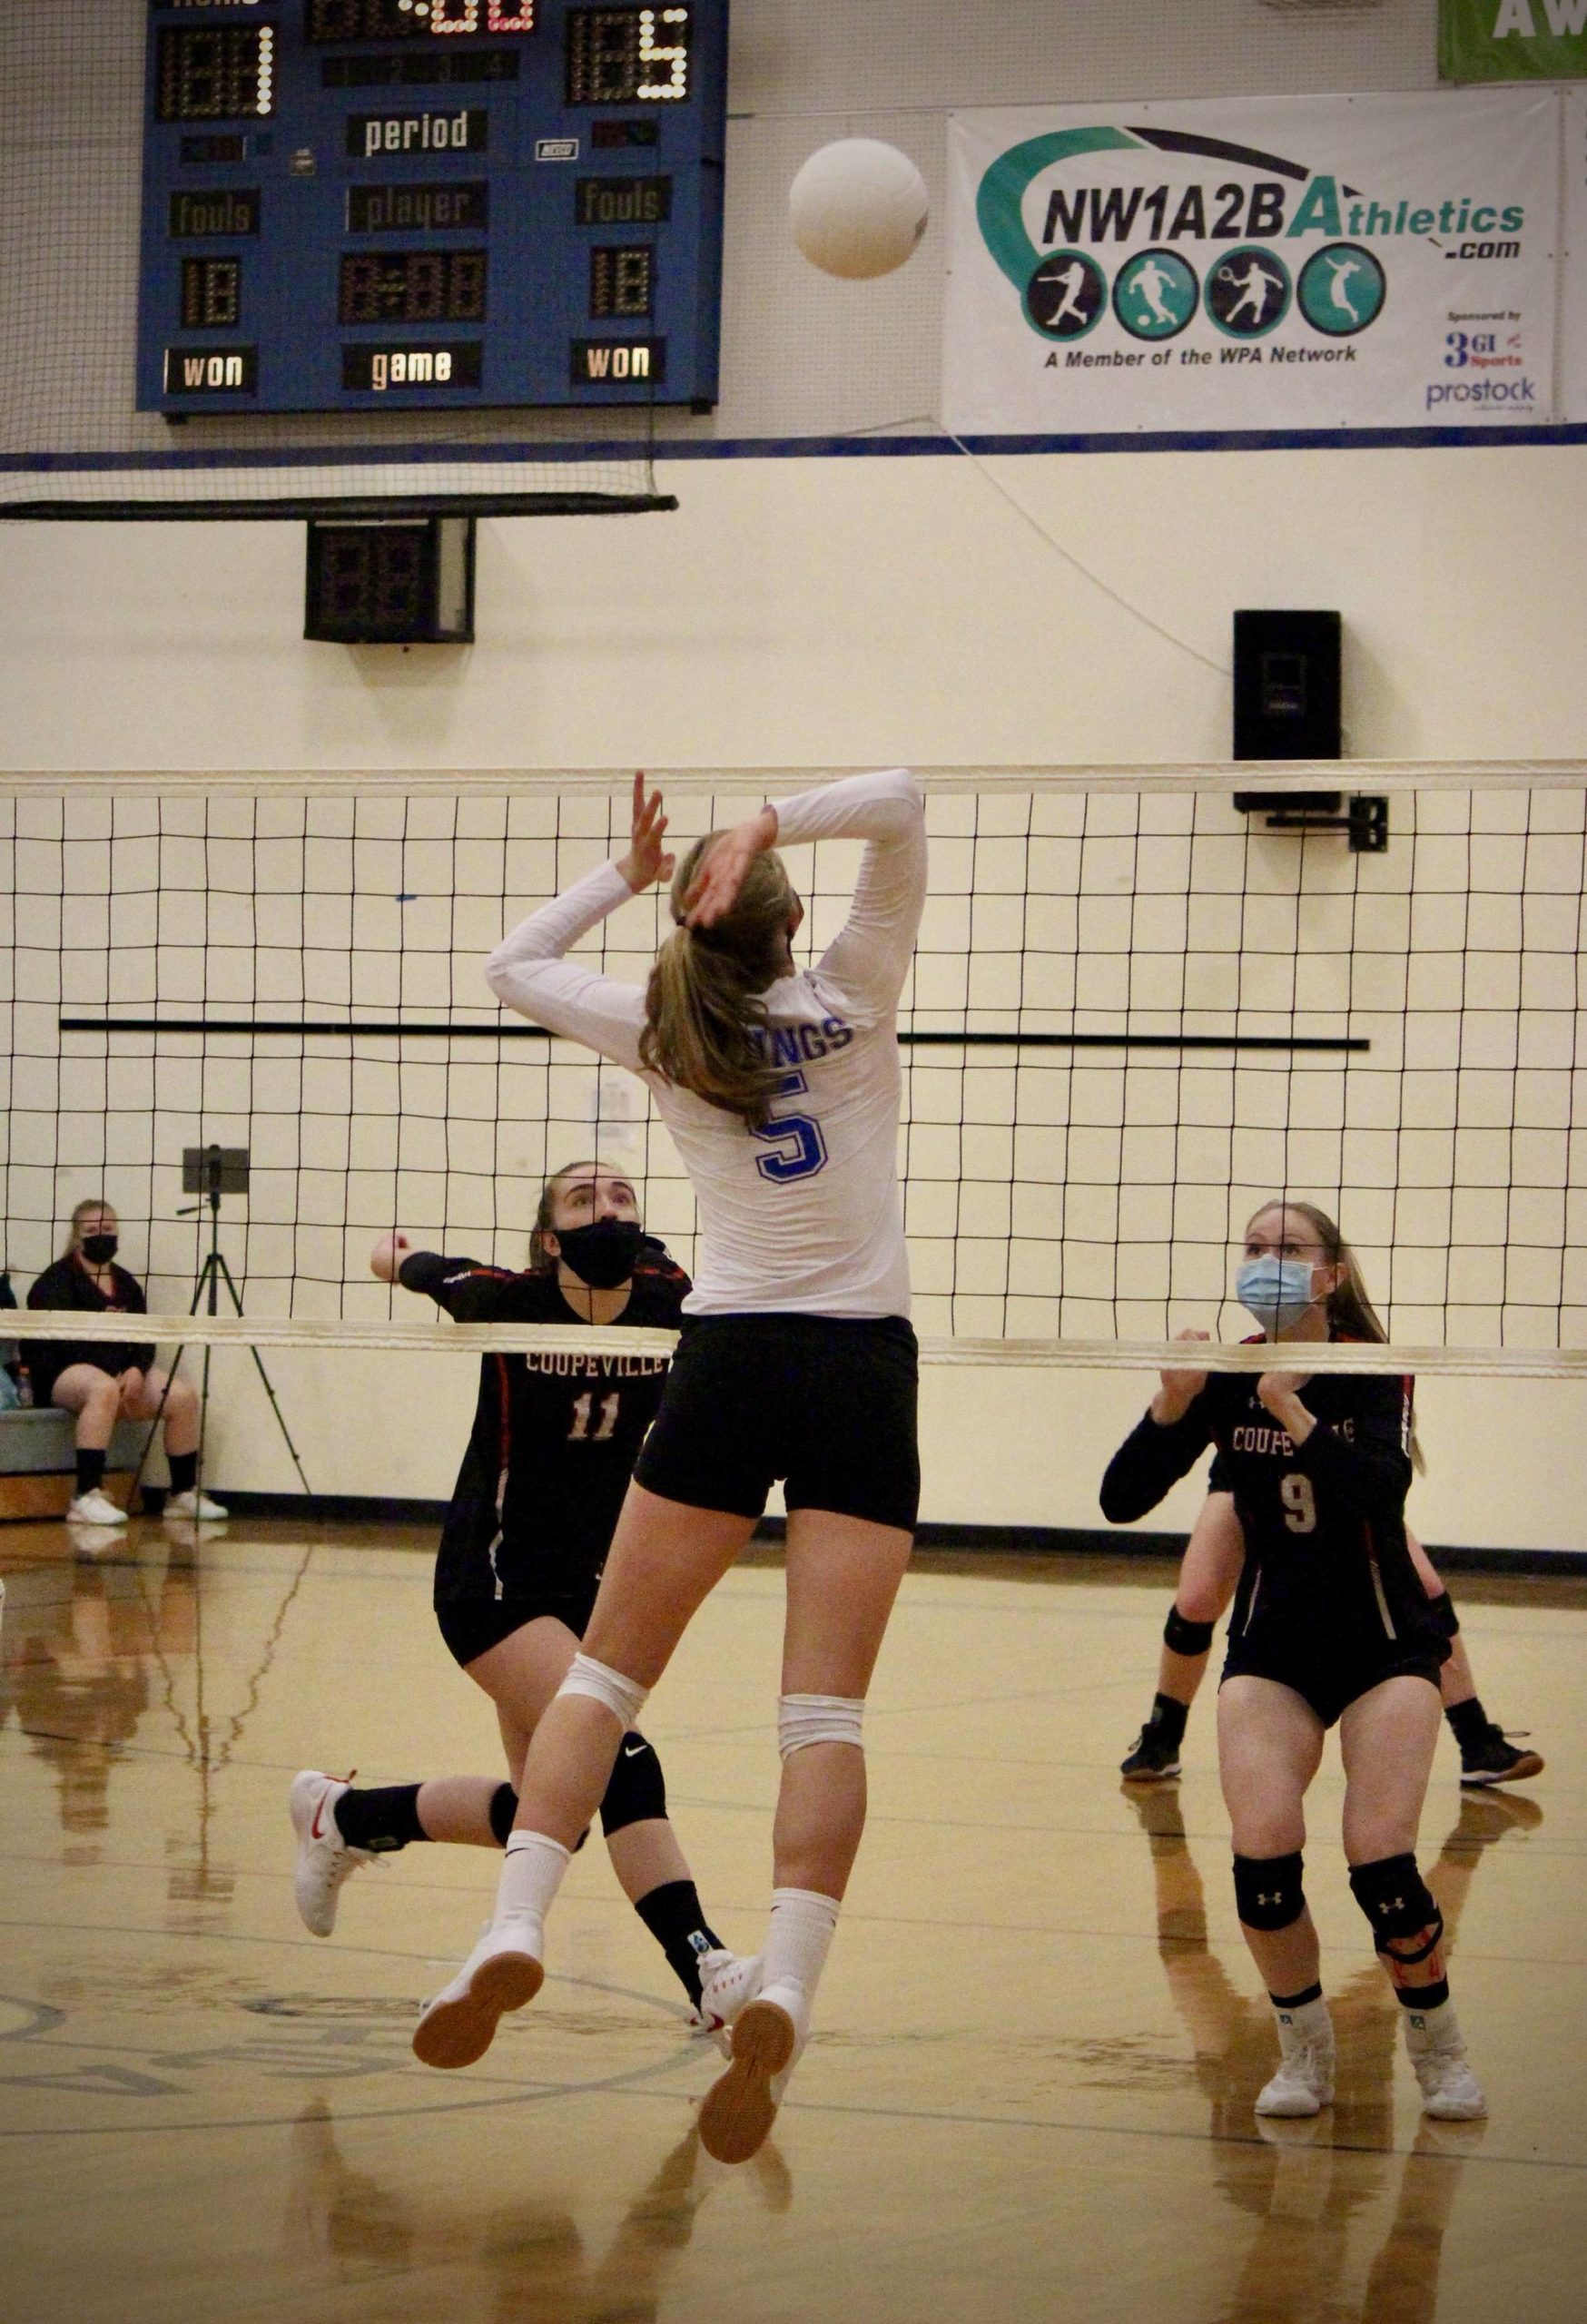 Corey Wiscomb/contributed photo
Freshman Bethany Carter elevates for a spike against Coupeville.